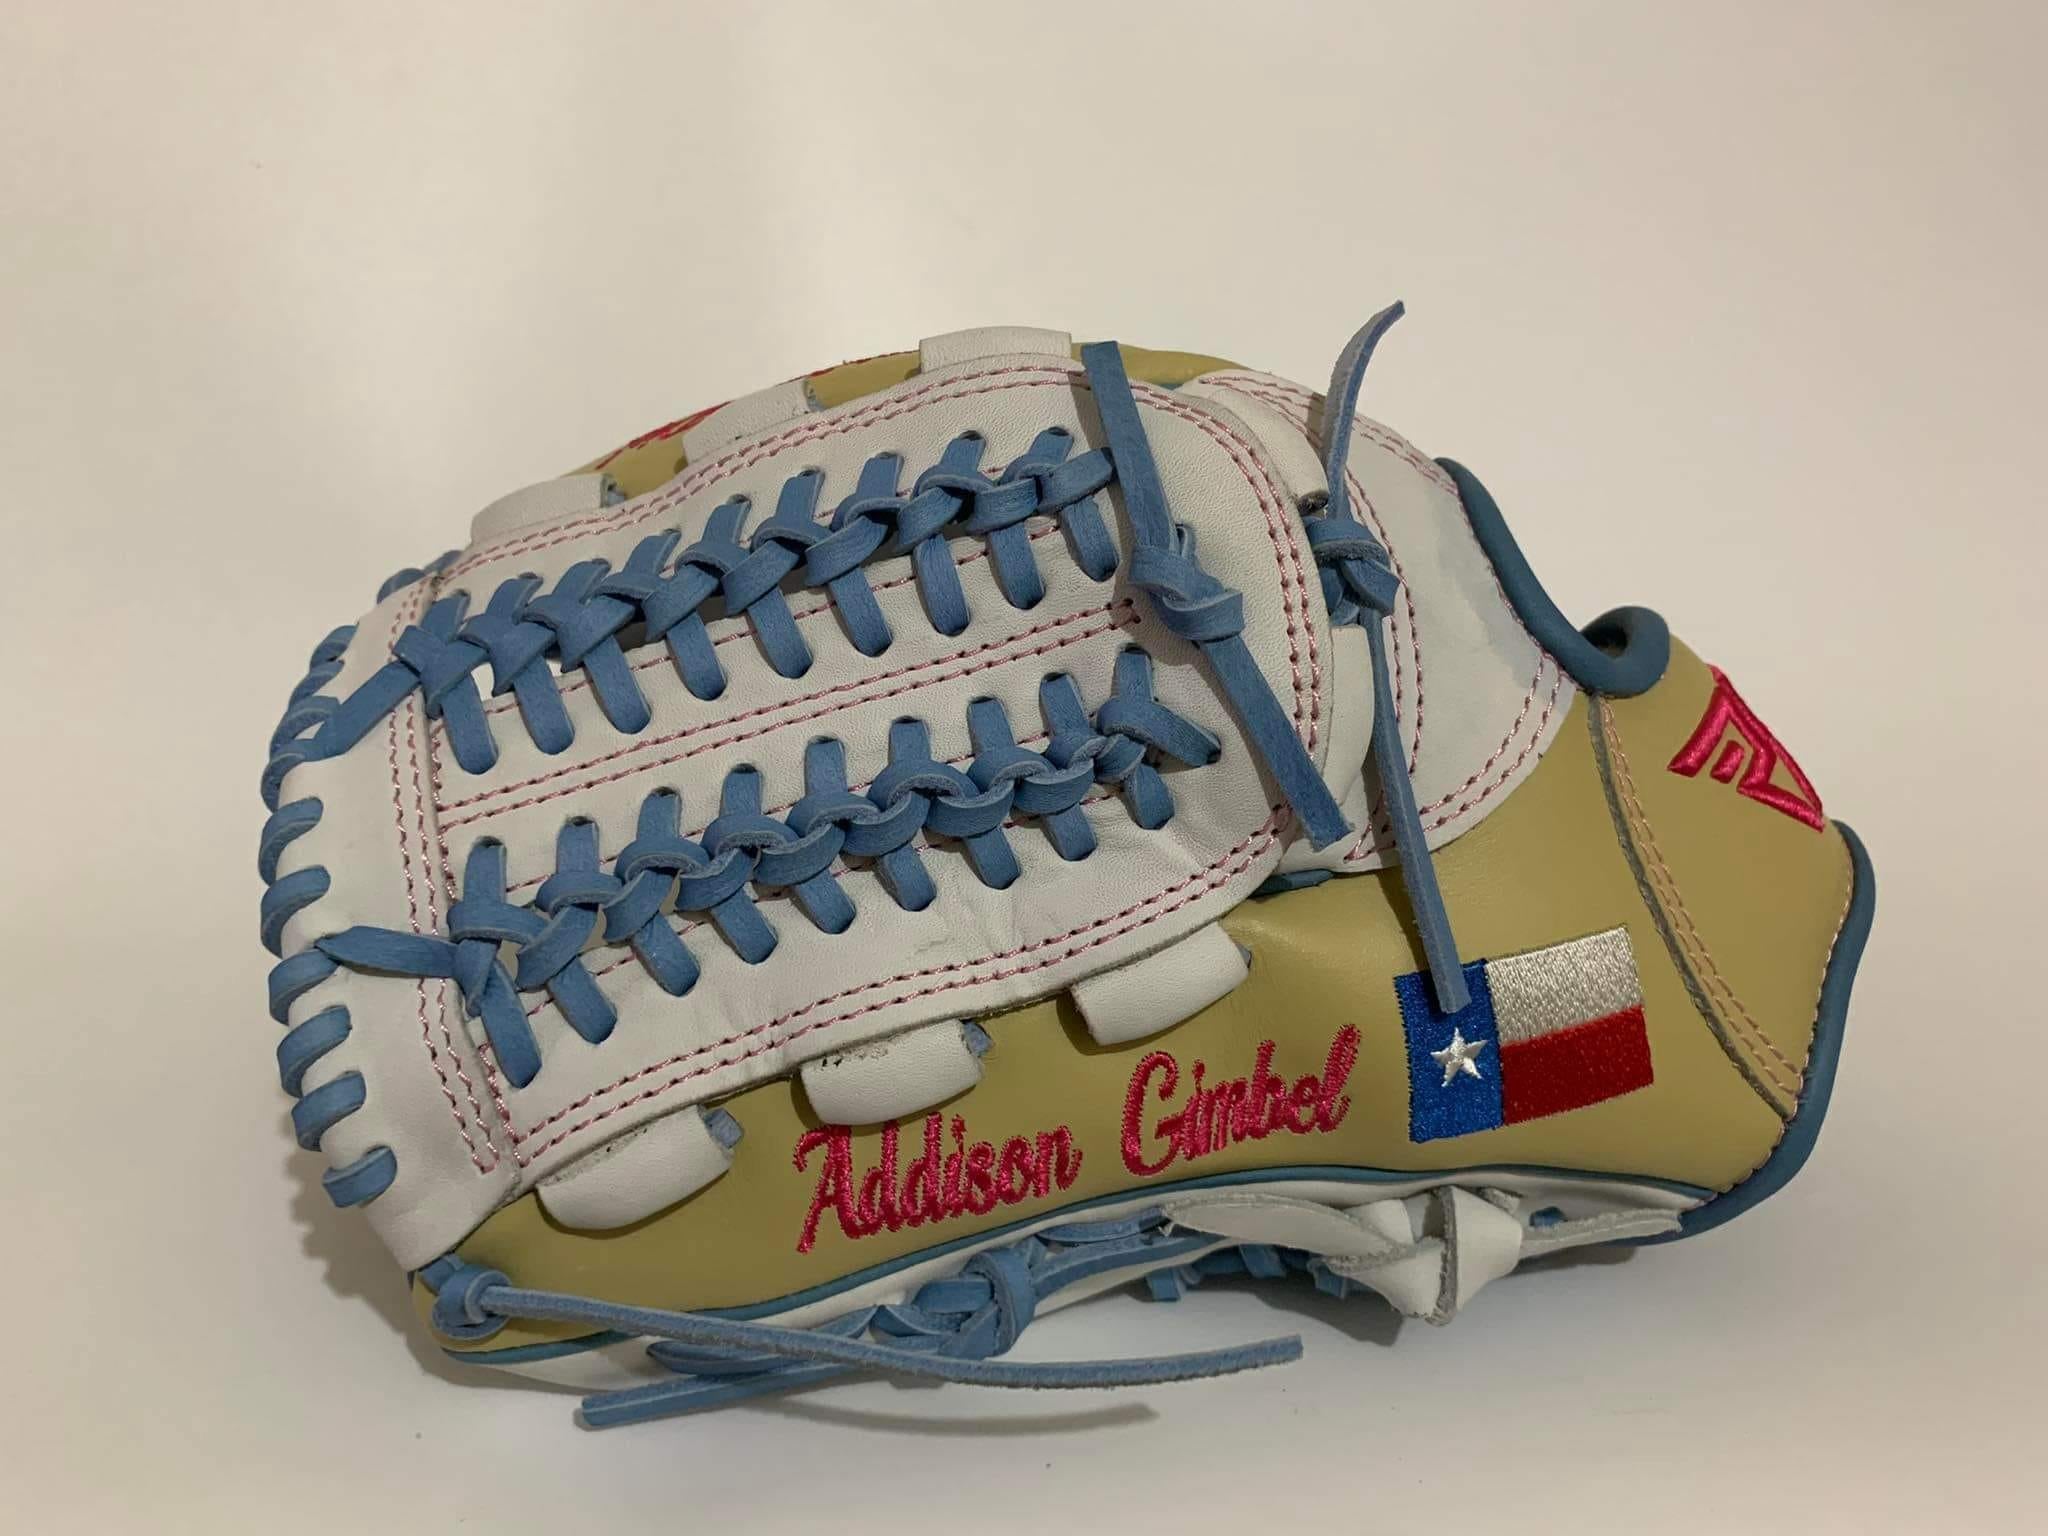 Here Is Where You Can Customize Baseball Gloves - Relentless Sports